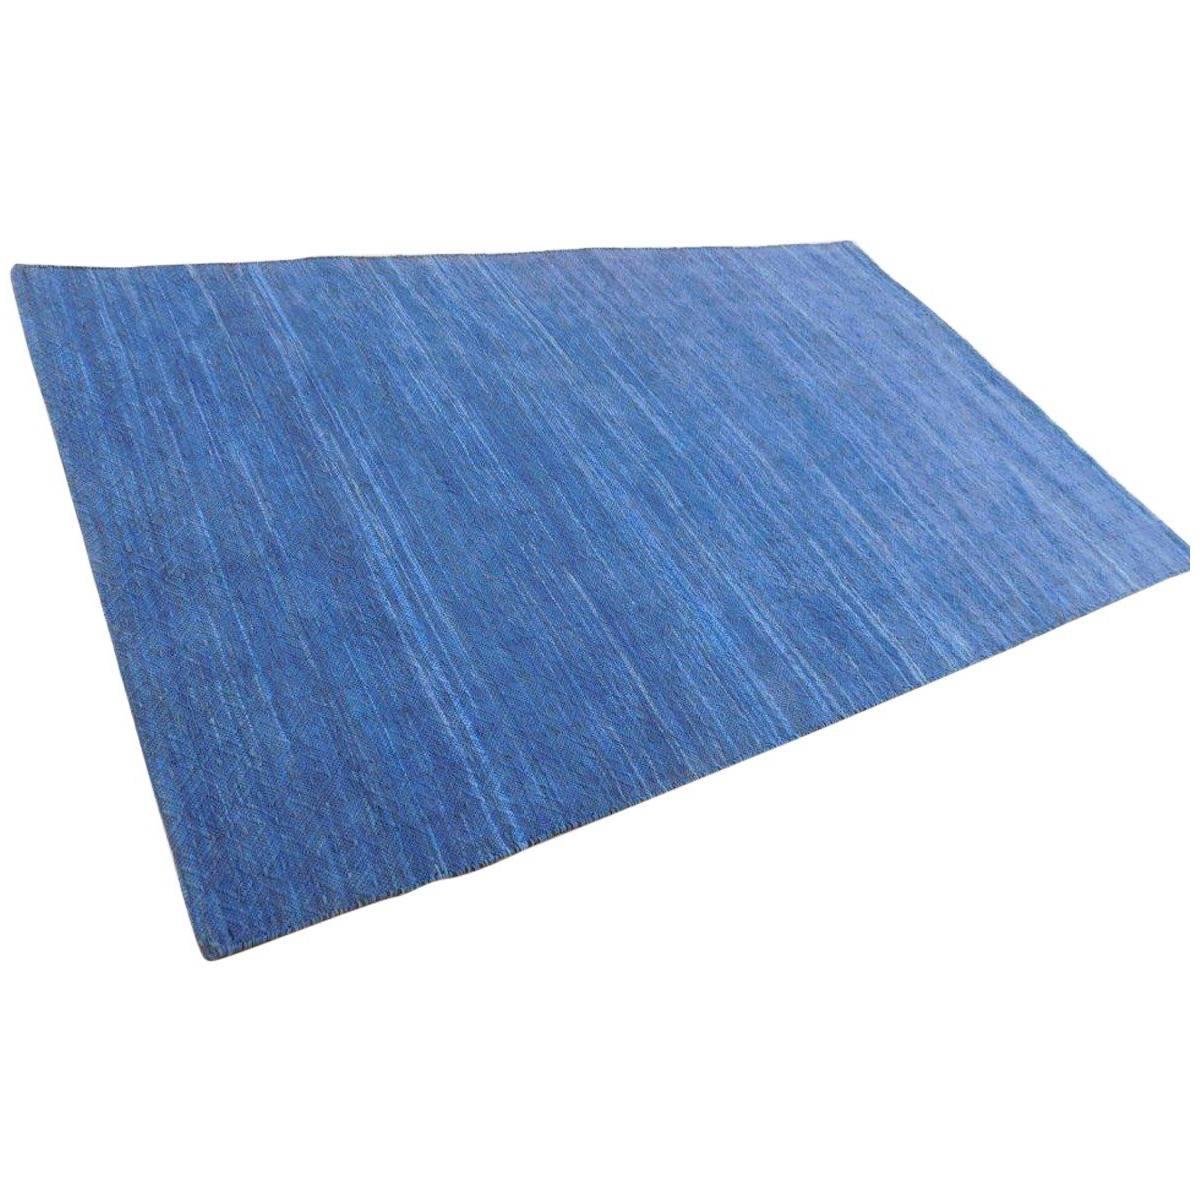 Indigo Denim Blue Suede Contemporary Flat-Weave Woven Rug in Stock For Sale